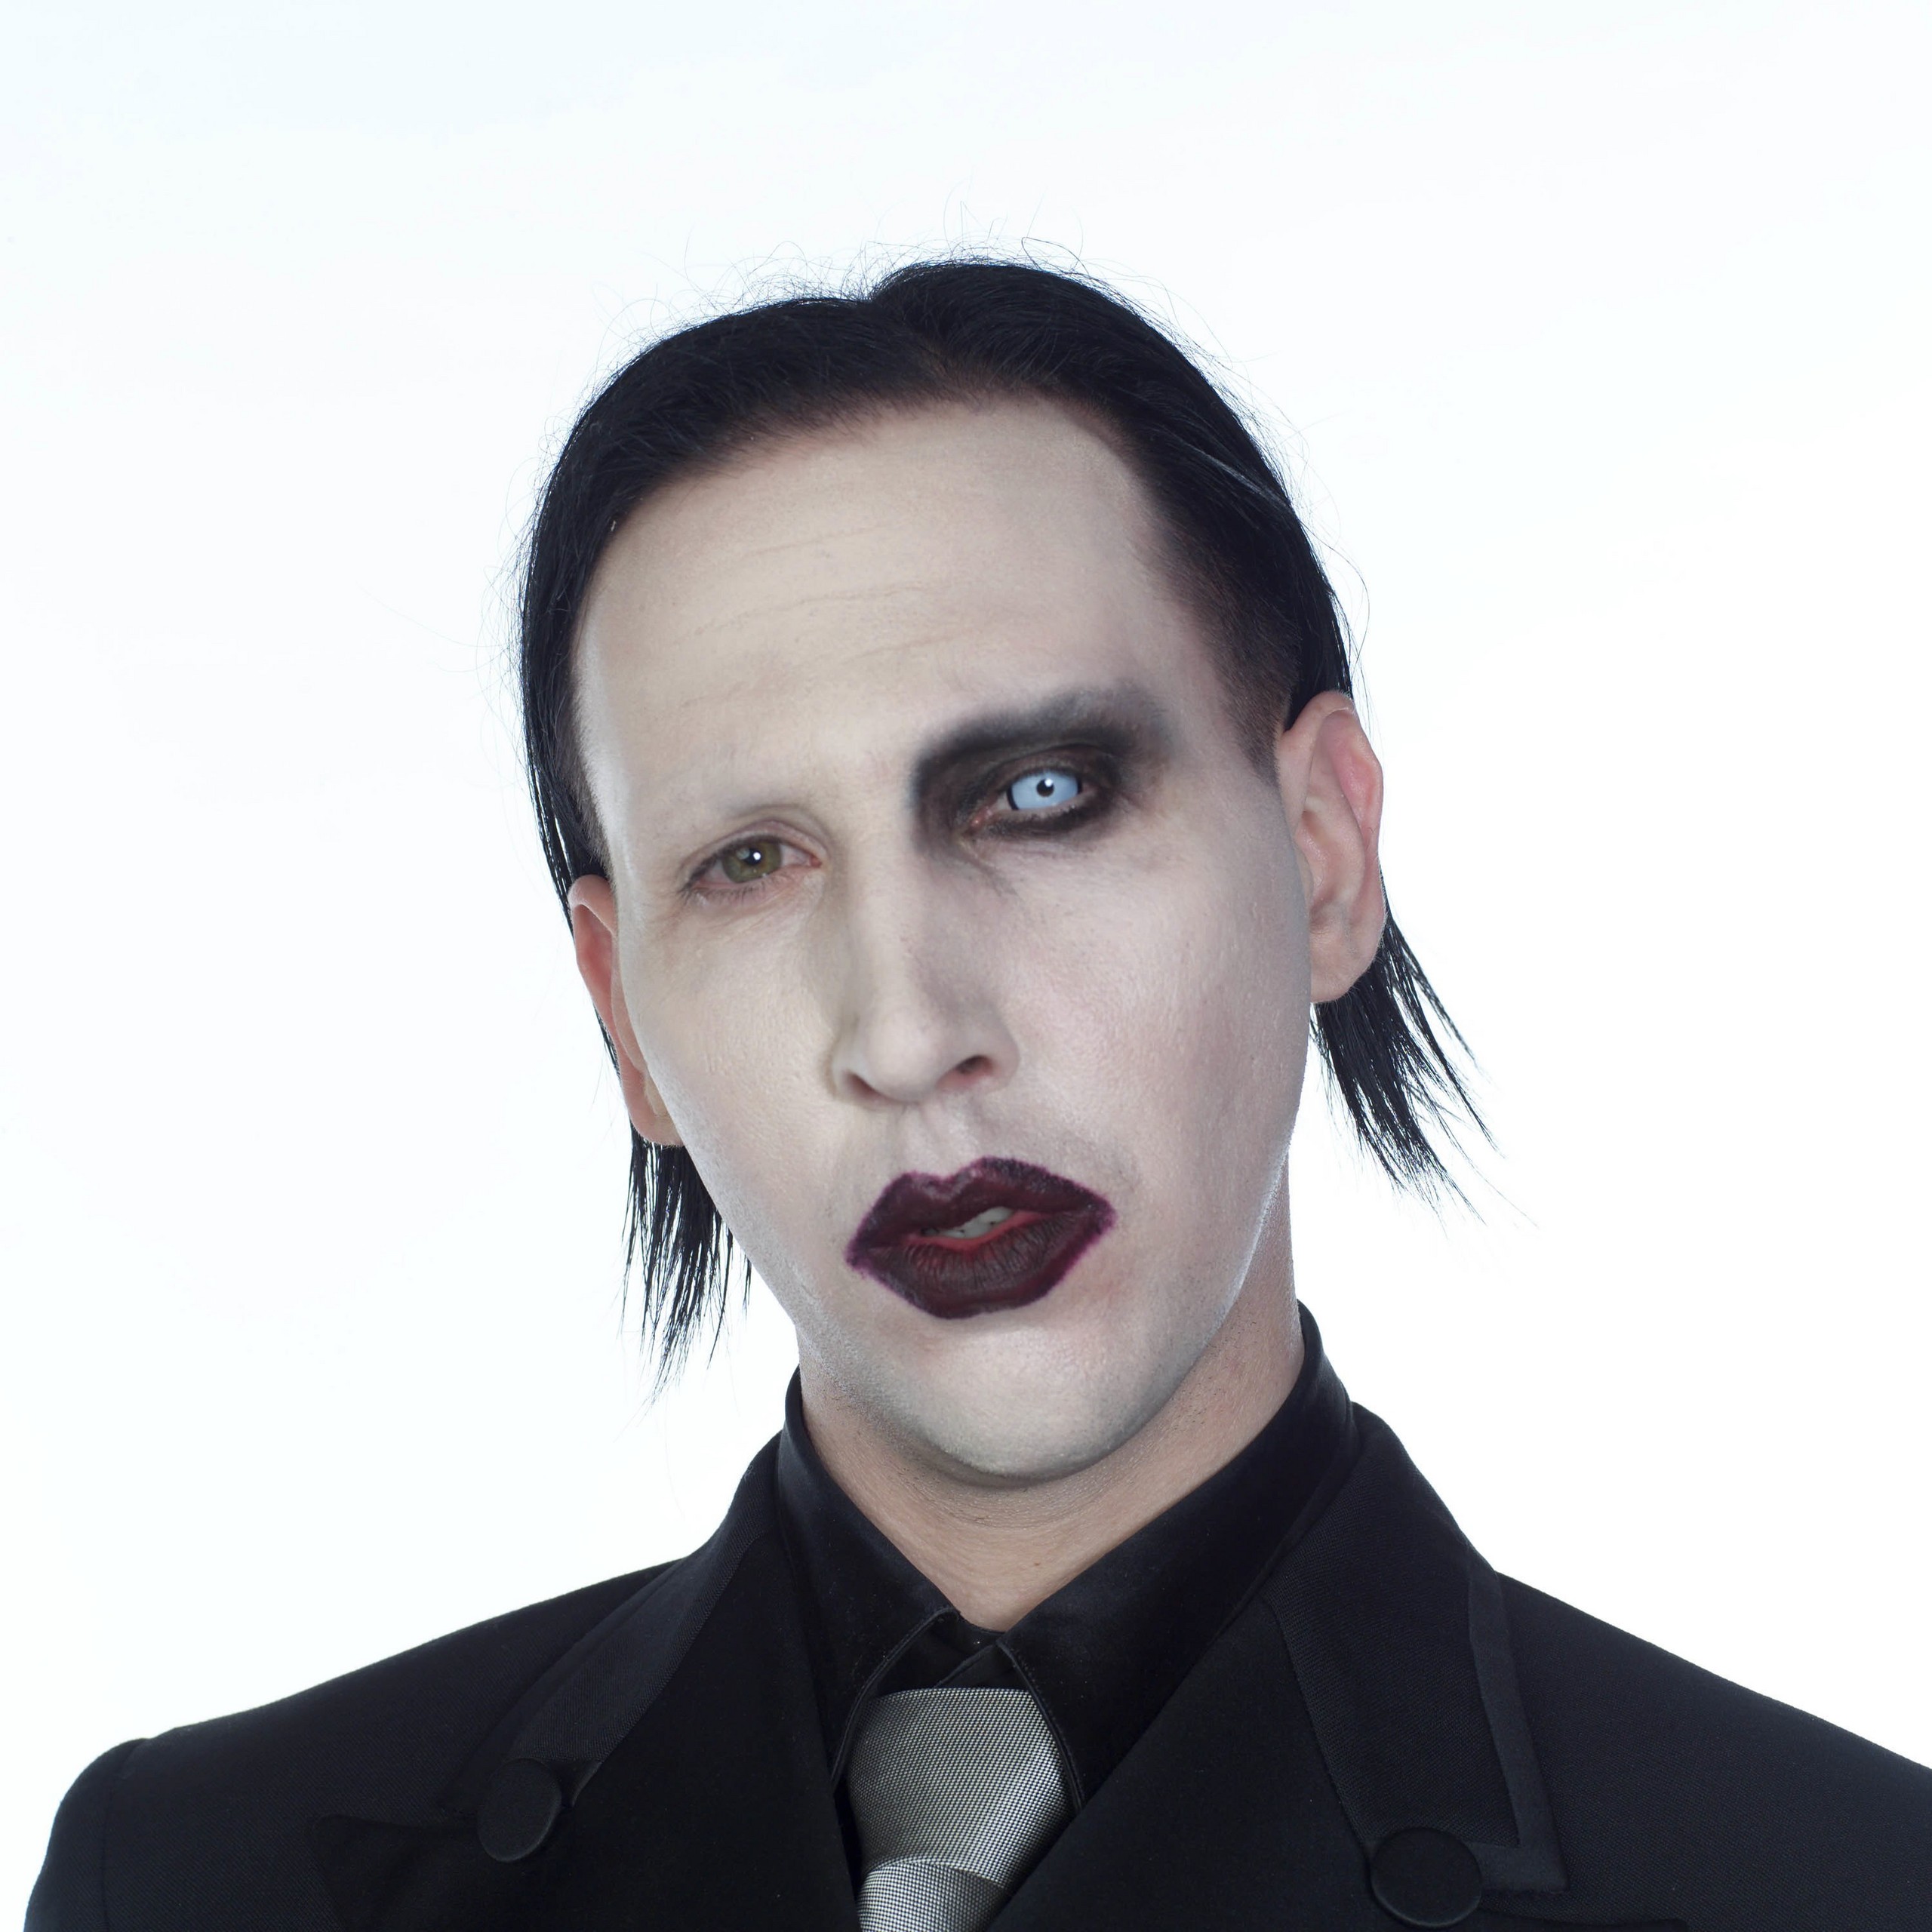 The guard was not amused by having his head humped by Marilyn Manson as part of a performance and sued for sexual assault and intentional infliction of emotional distress.  Originally charged with criminal sexual misconduct, a judge tossed that charge out and eventually both sides came to a settlement.